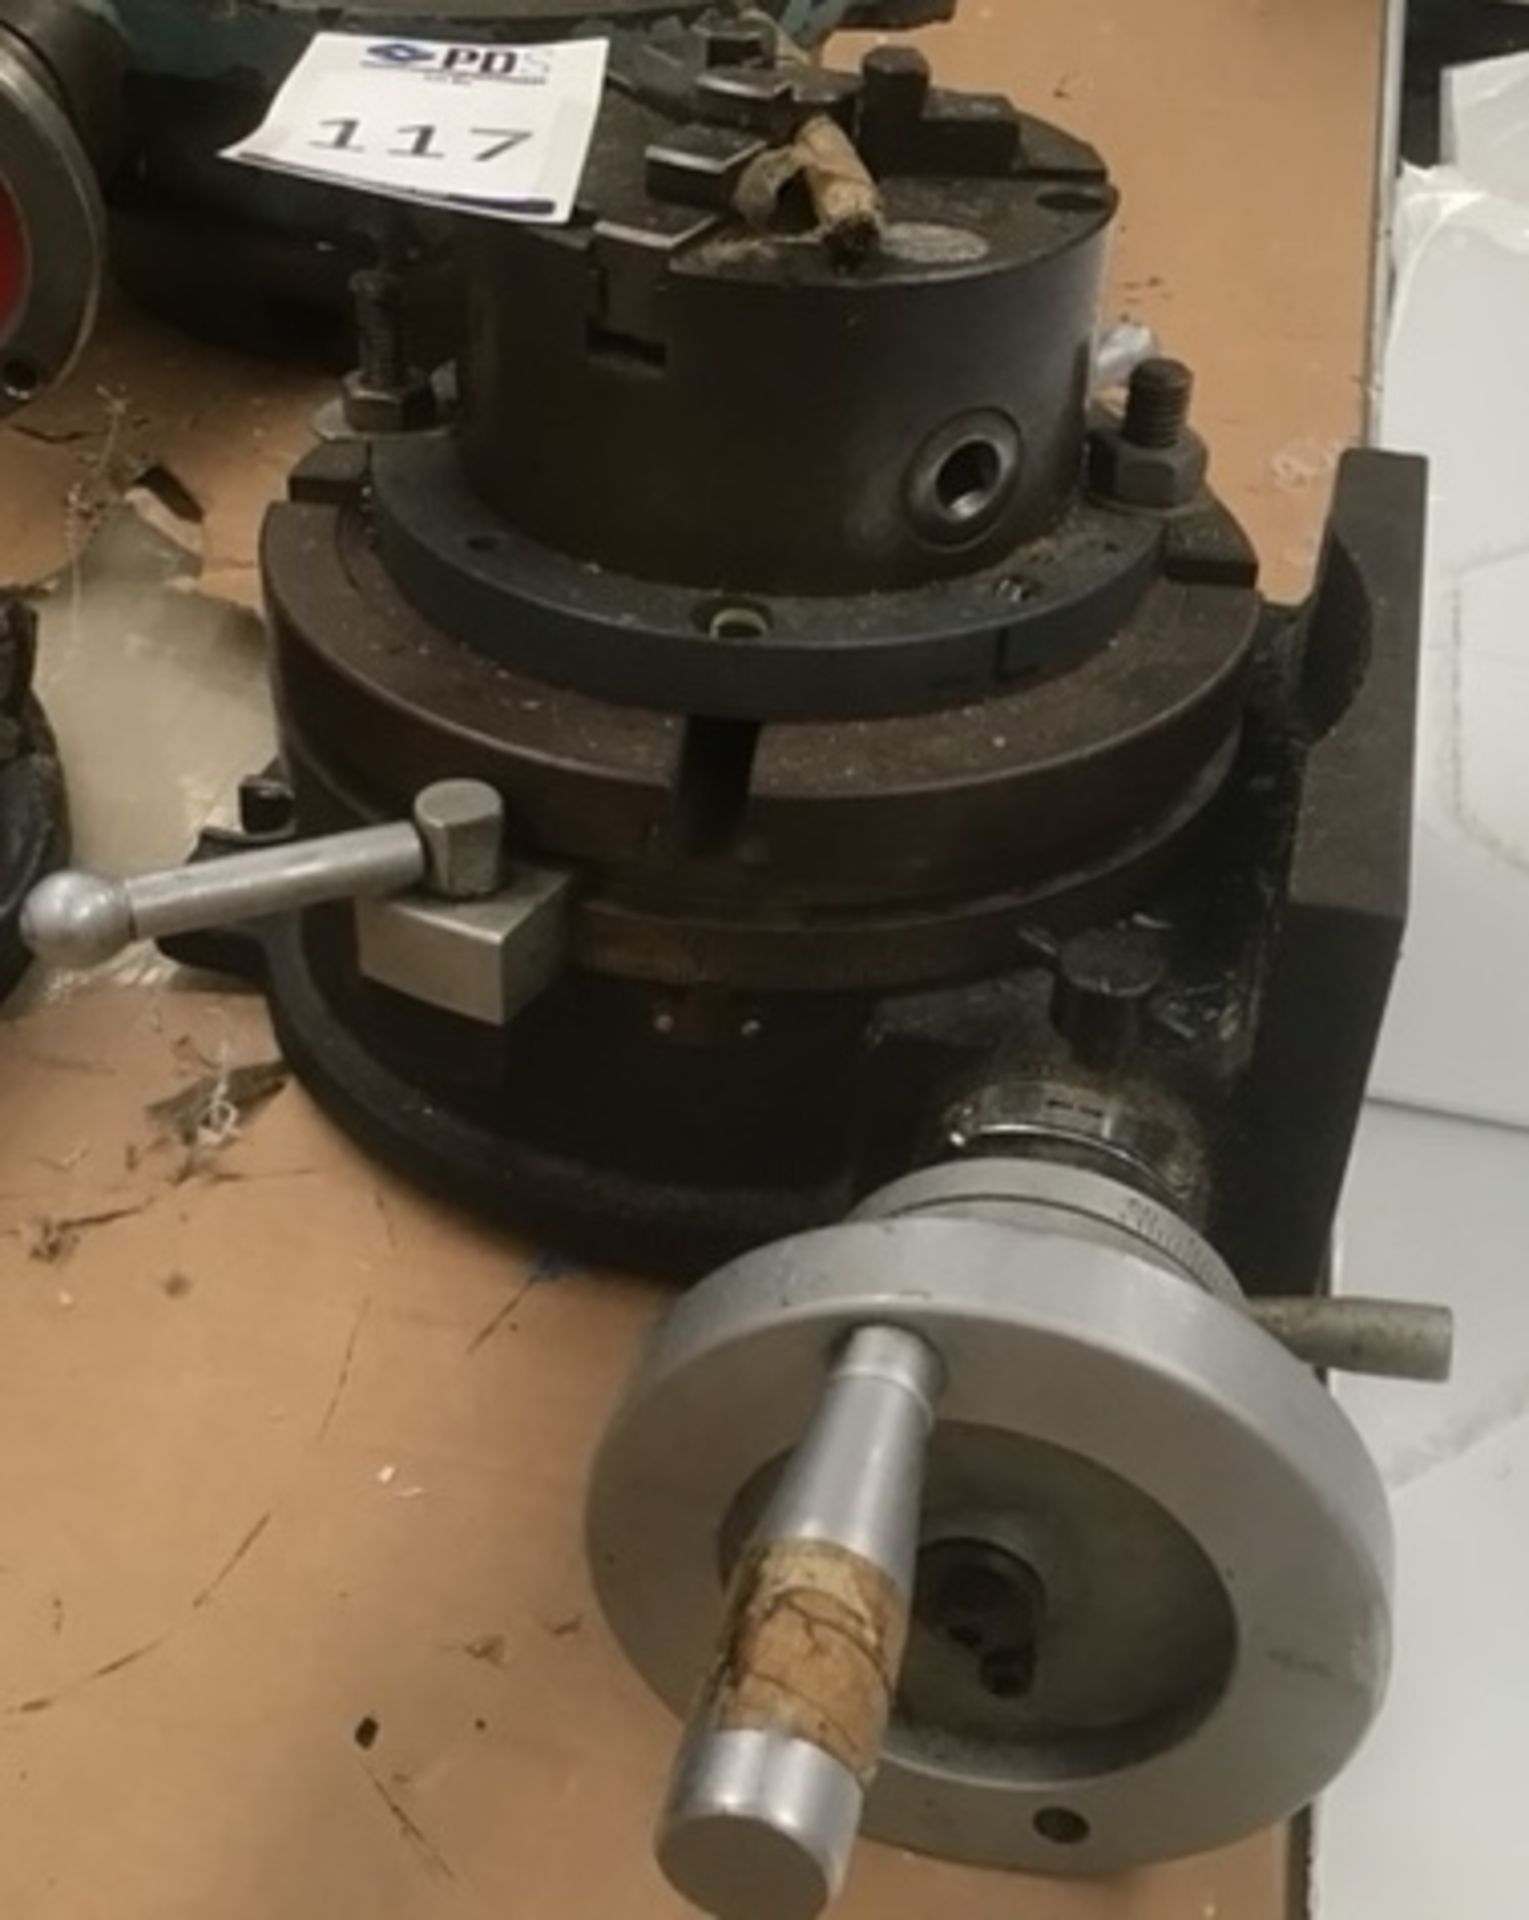 Rotary Table fitted 3-Jaw Chuck (Location: Earls Barton. Please Refer to General Notes)